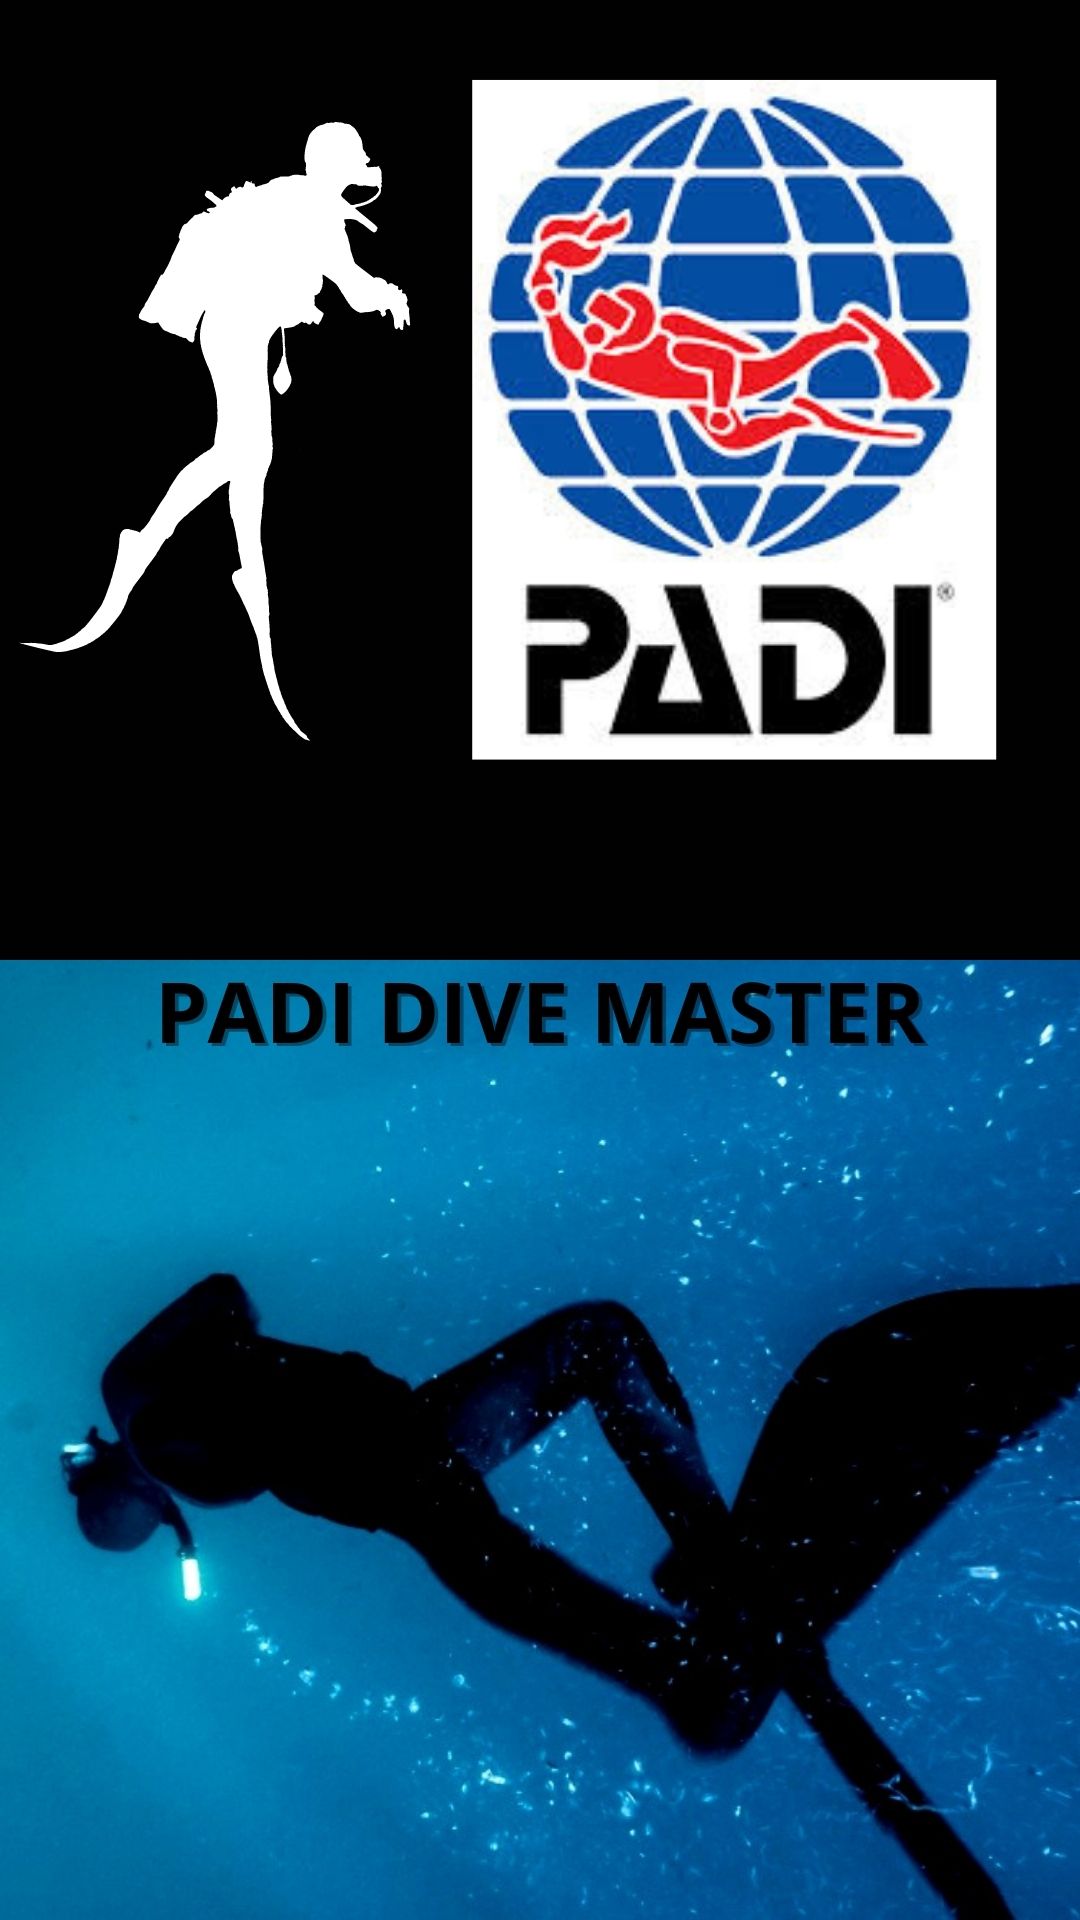 Dive master: ​no more holding back and GO PRO!